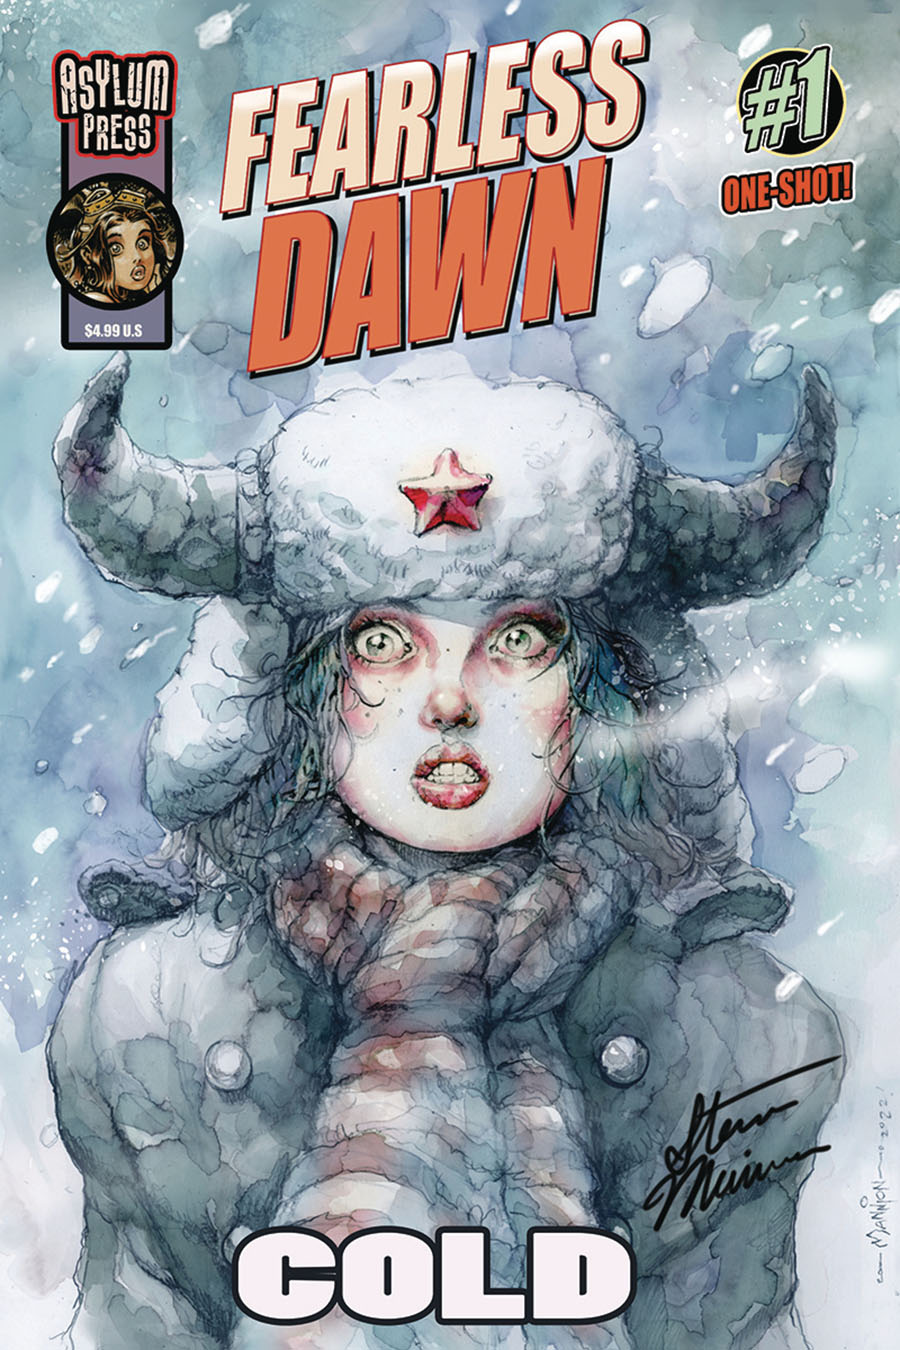 Fearless Dawn Cold #1 (One Shot) Cover E Regular Steve Mannion Cover Signed Edition